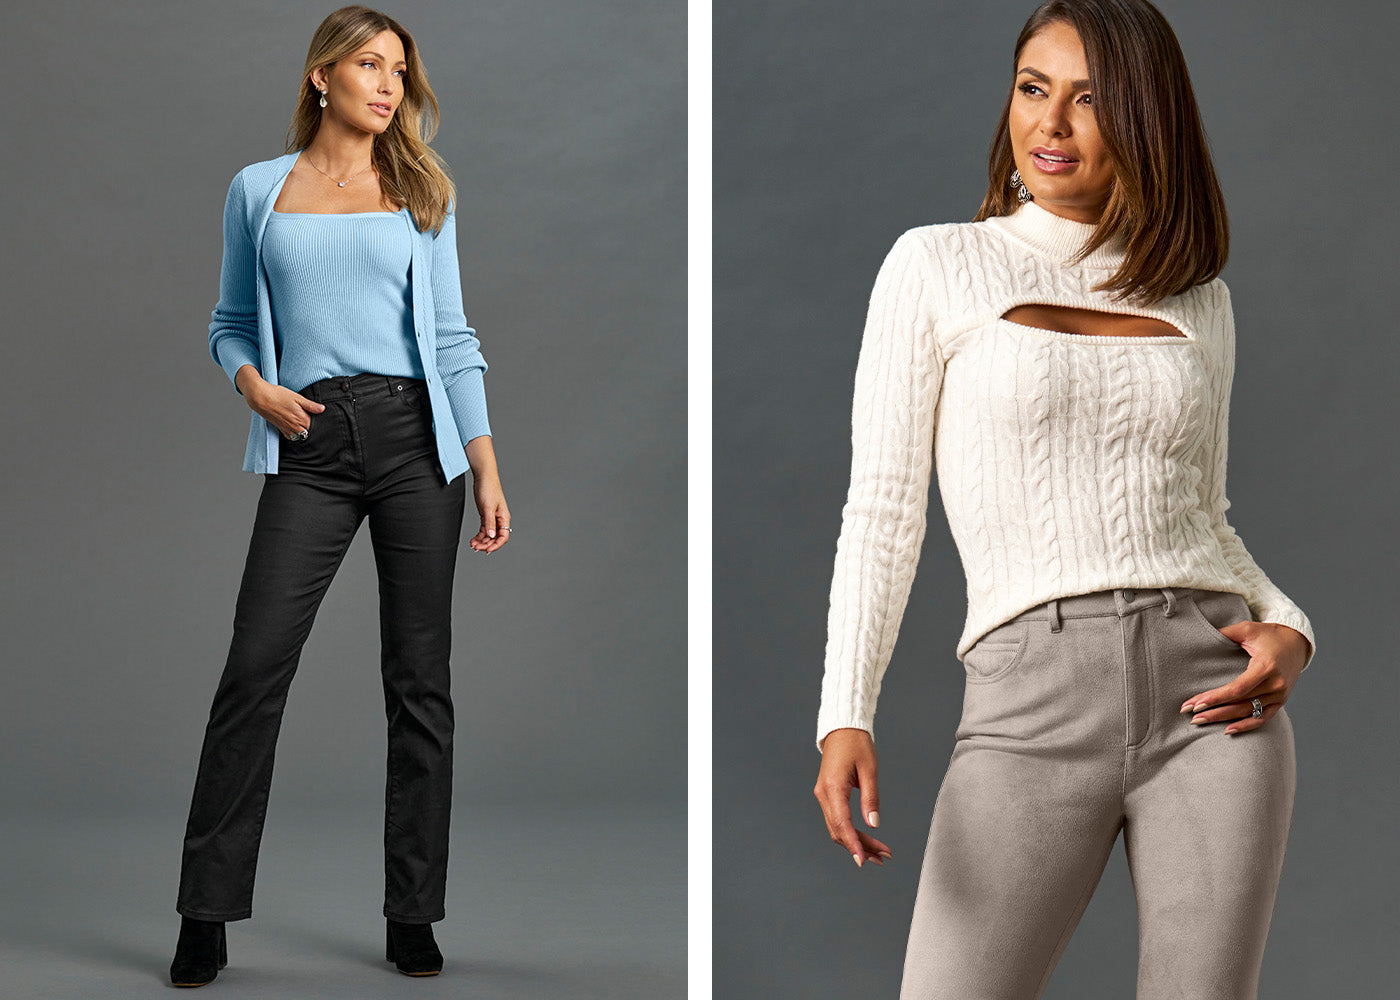 Tile 1 model has light blue tank top and sweater with newport black jeans. Tile 2 model wearing textured off white sweater and light grey monterey bootcut jeans.